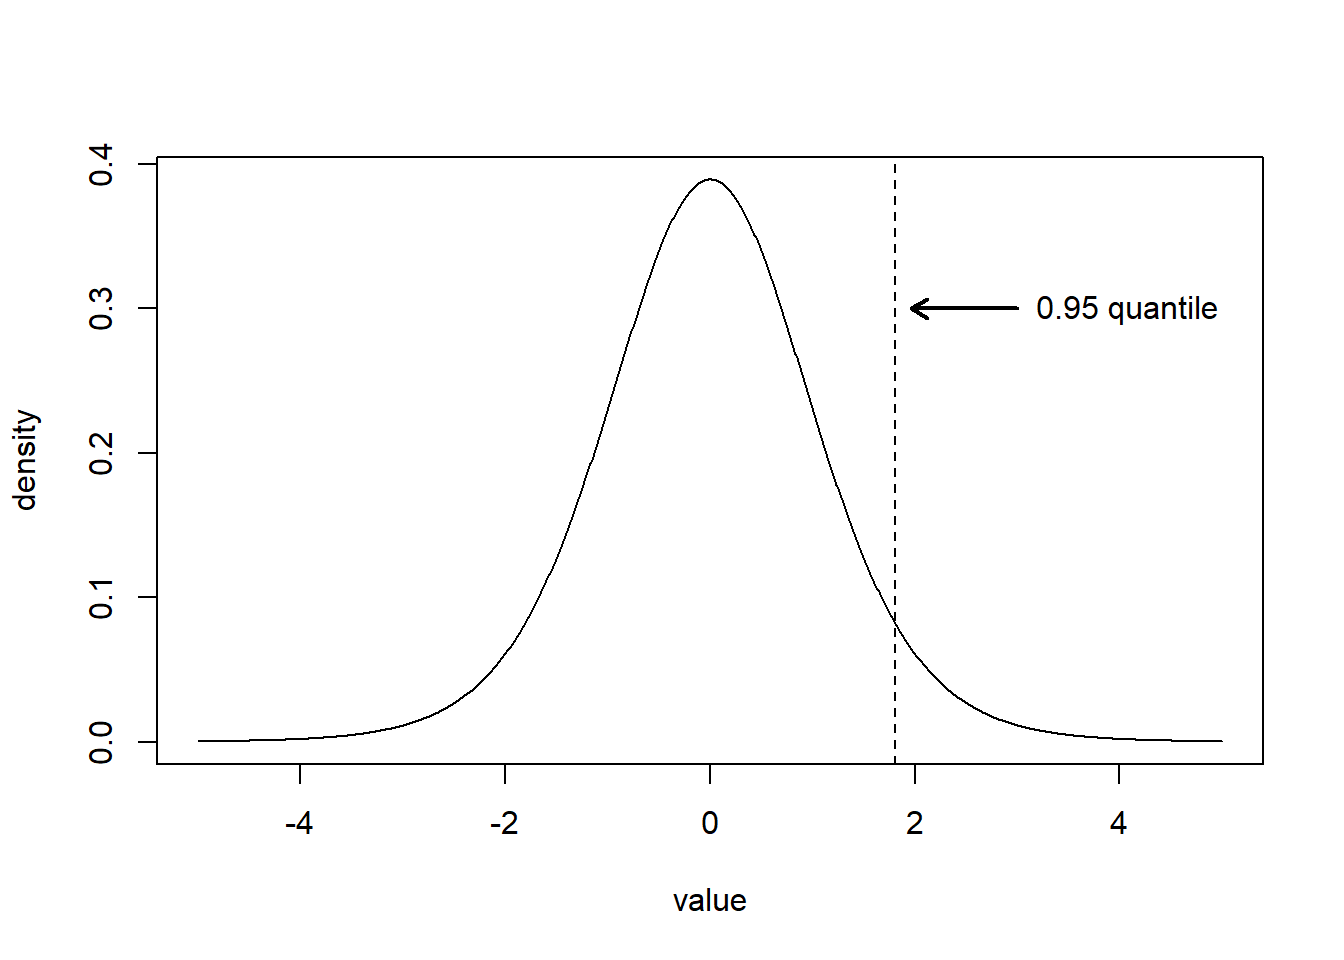 The solid line shows the density of a $t$ random variable with 10 degrees of freedom. The dashed vertical line indicates $t^{0.05}_{10}$, the 0.95 quantile of a $t$ distribution with 10 degrees of freedom. The area to the left of the line is 0.95 while the area to the right is 0.05.